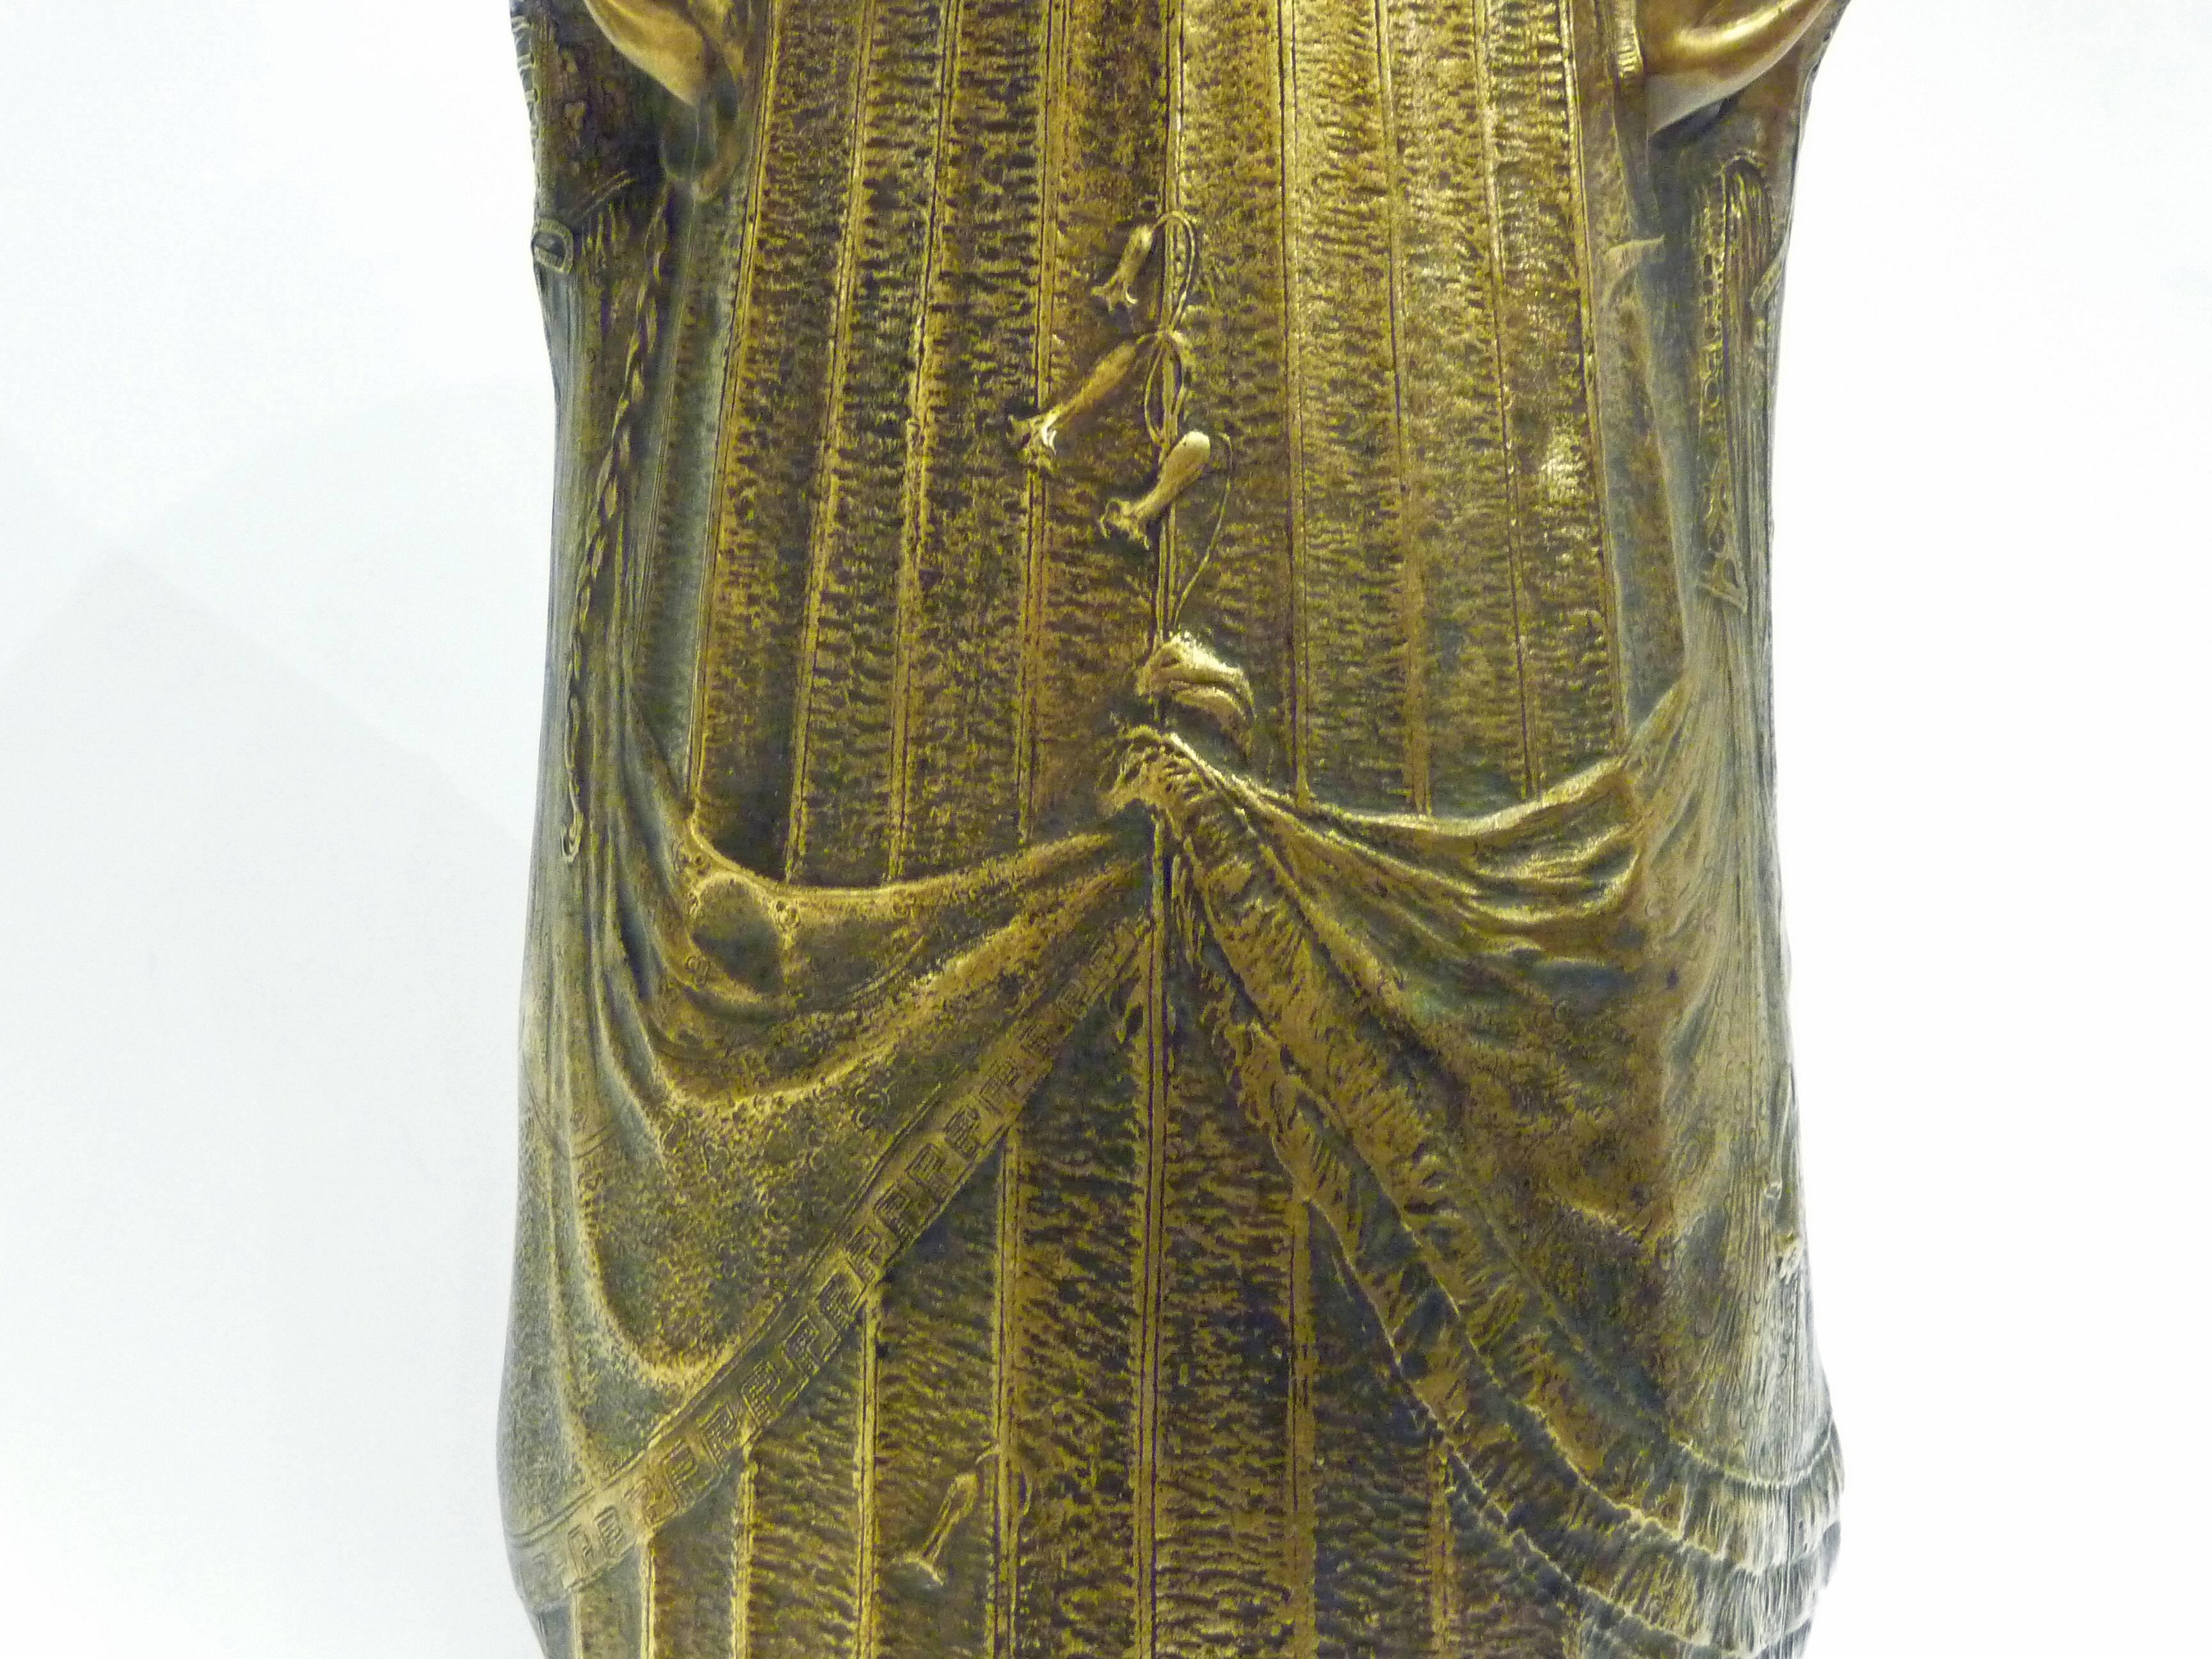 Alexandre Clerget.
Siot-Decauville.
"Jacinthe des bois."
 An Art Nouveau gilt bronze vase.
Signed on the base; bearing the foundry mark and numbered N 590.
Literature: Siot-Decauville, catalogue des bronzes et objets d'art, ill. pl.